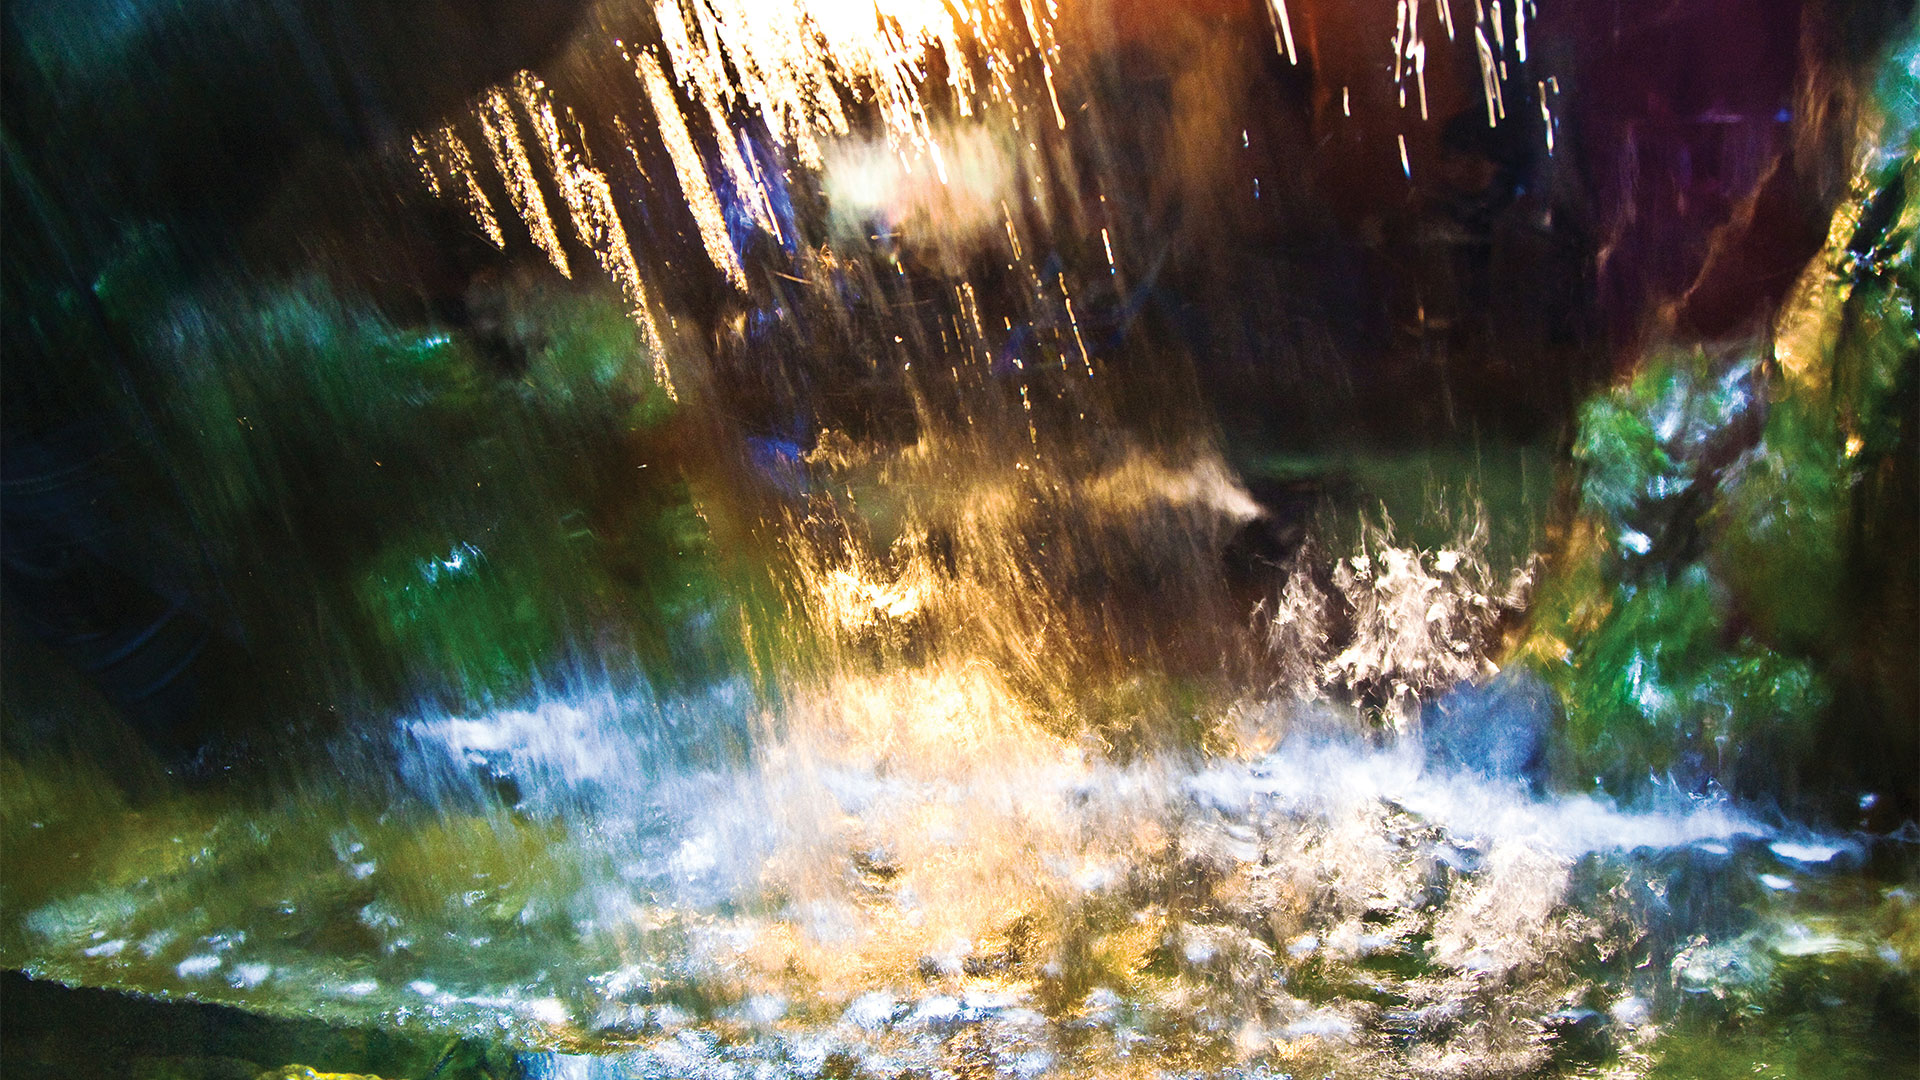 Abstract waterfall flowing down